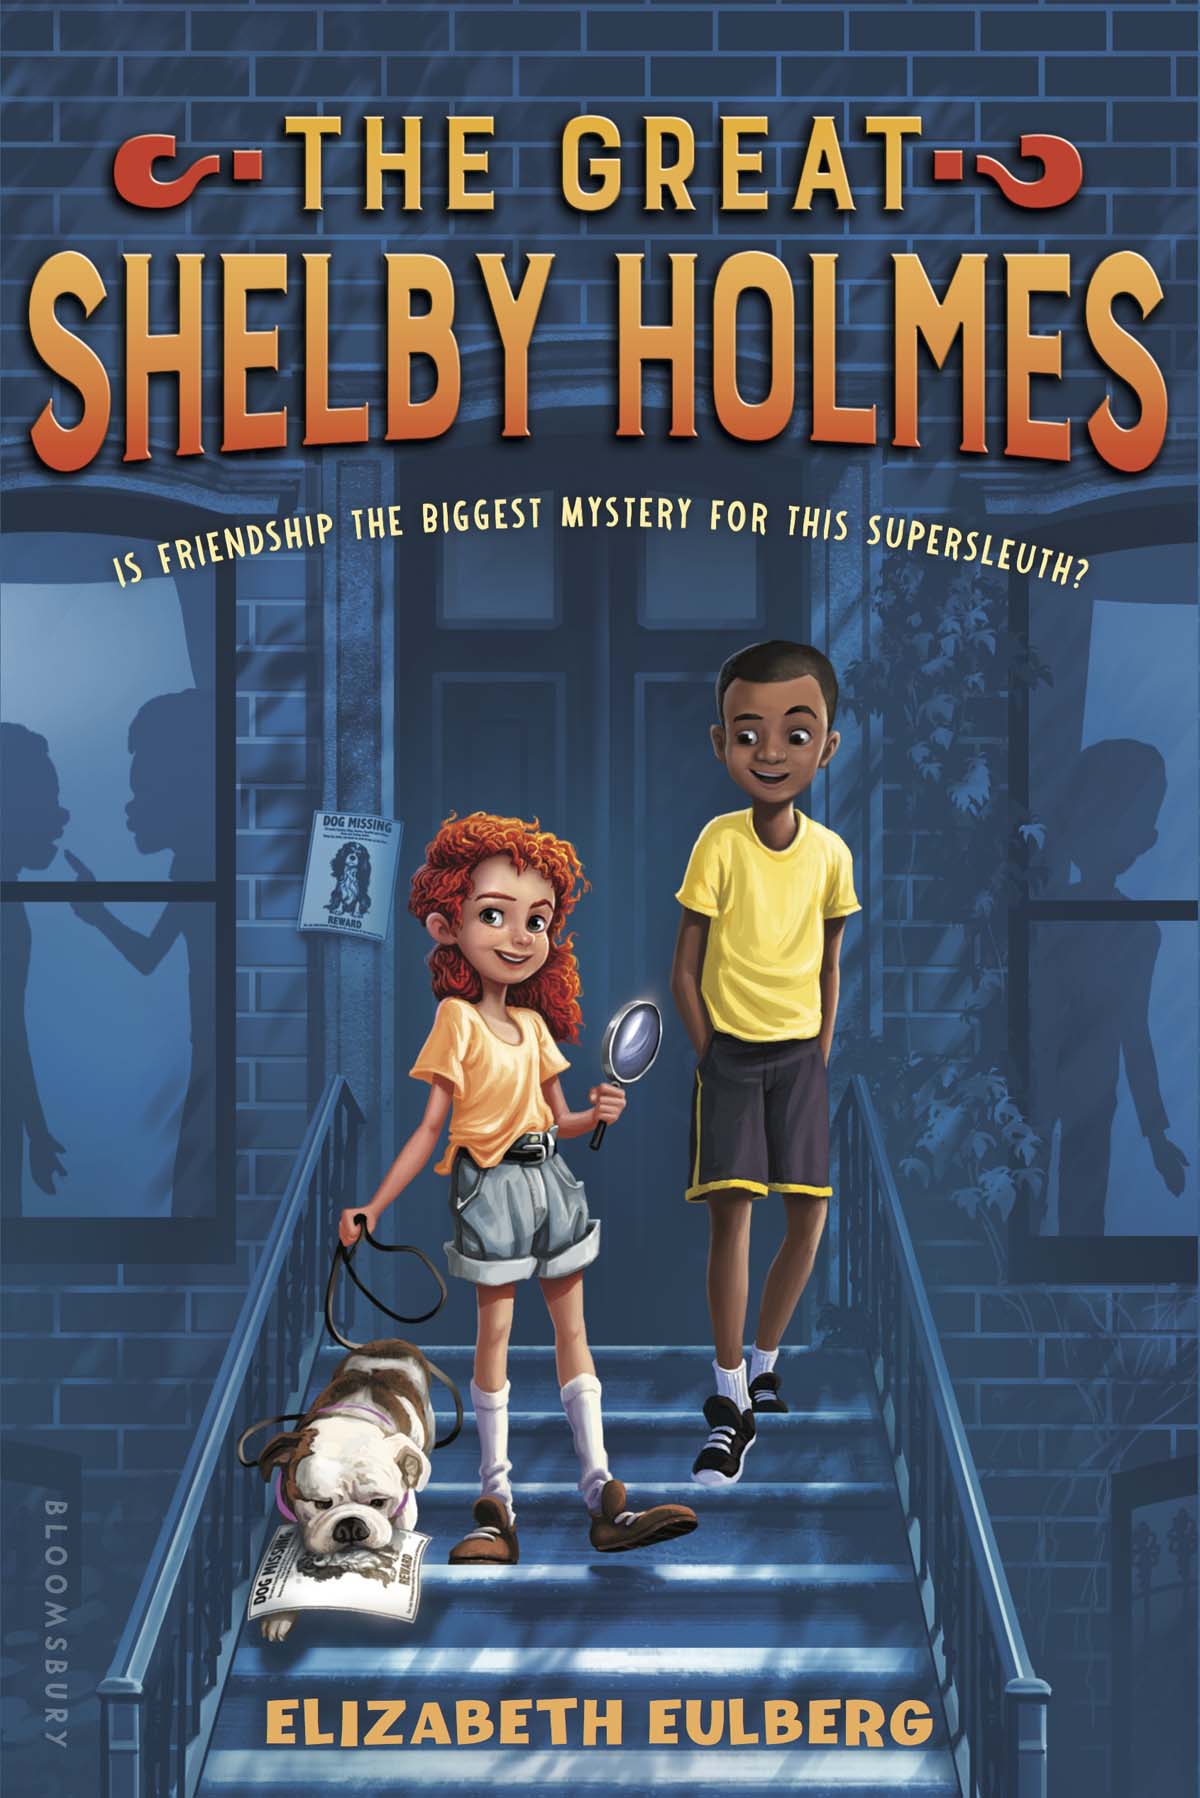 The Great Shelby Holmes (2016) by Elizabeth Eulberg